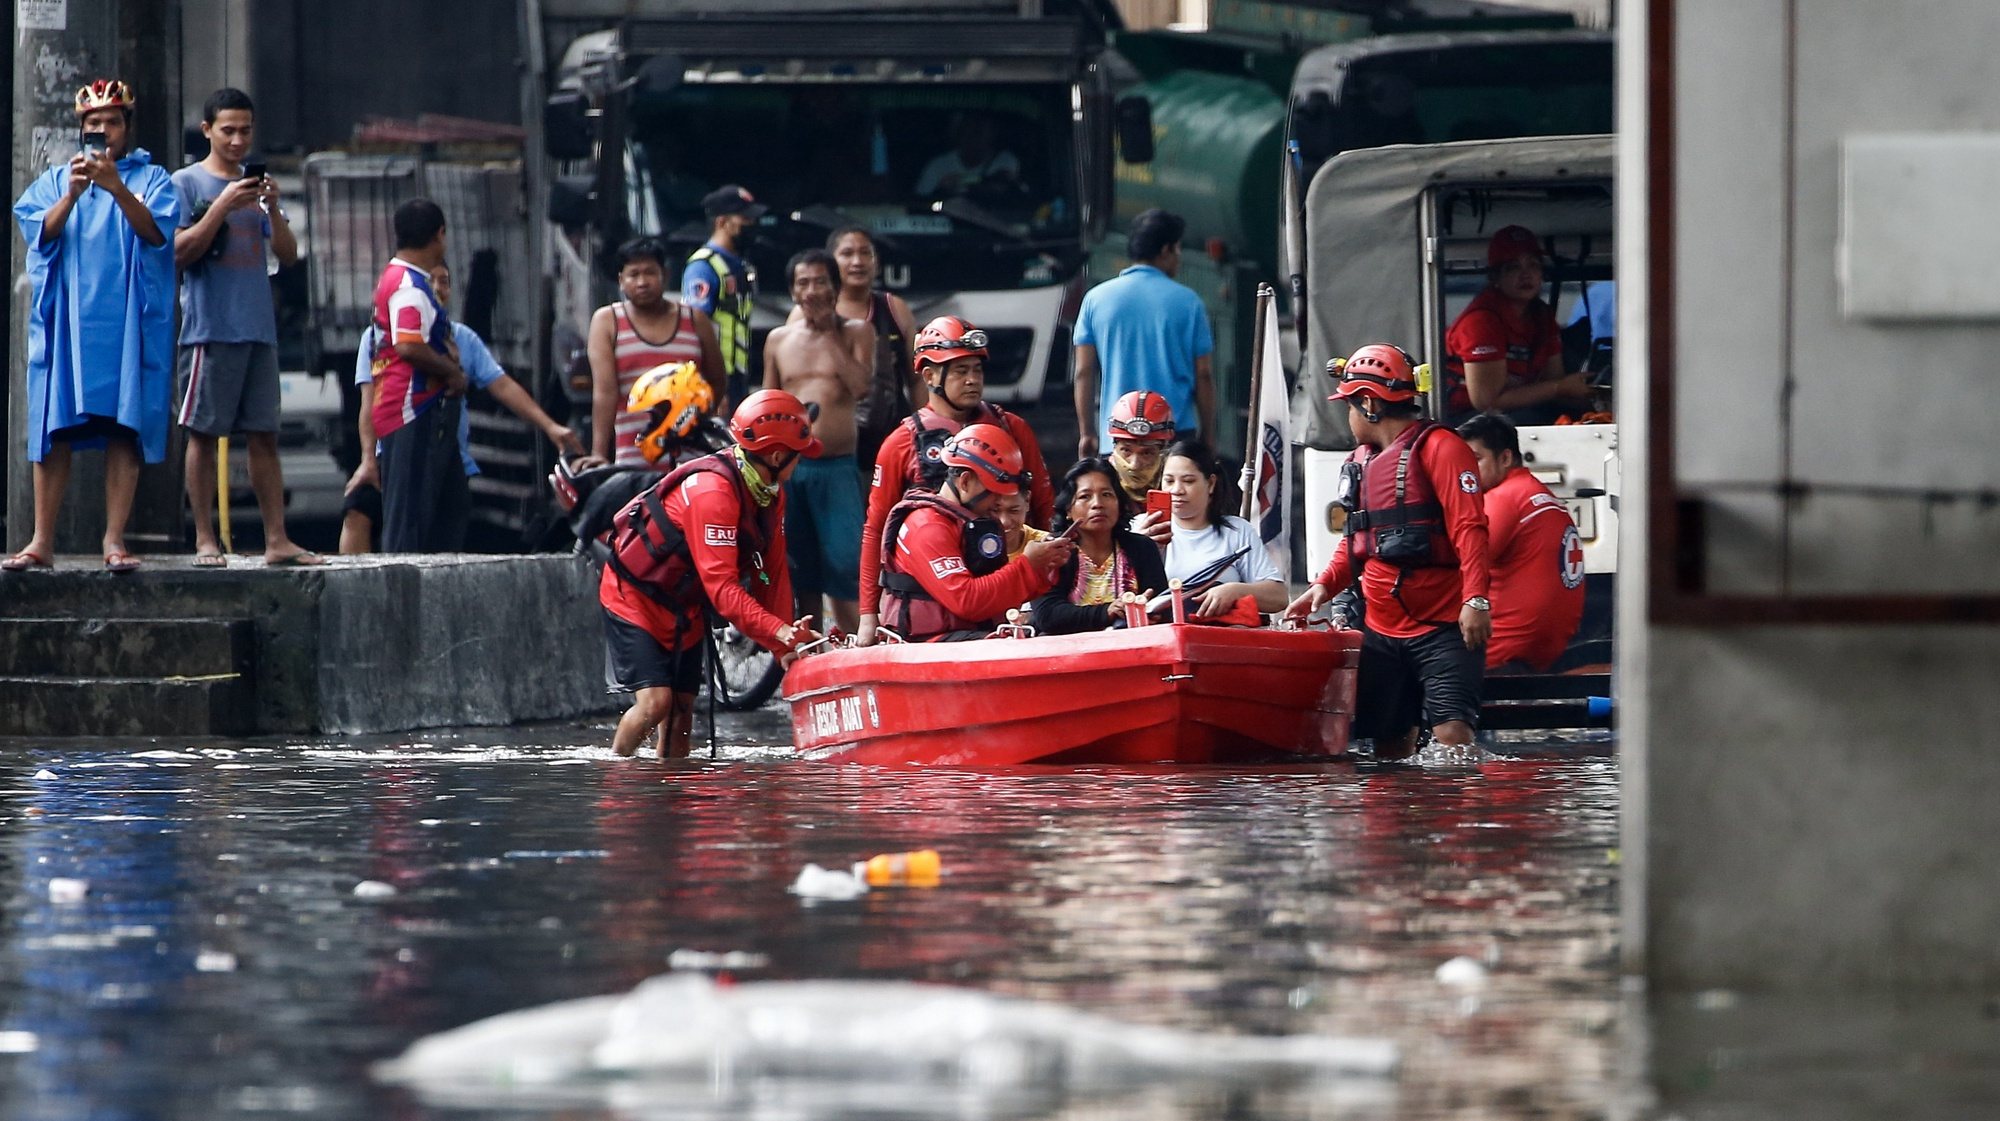 epa10830382 An emergency response team uses a rescue boat to help transport residents along a flooded road in Quezon City, Metro Manila, Philippines, 31 August 2023. Typhoon Saola, which has left the Philippine Area of Responsibility, and Tropical Storm Haikui off the coast of extreme northern provinces are enhancing a southwest monsoon bringing rains in the western Luzon region of the country, according to data from the Philippine Atmospheric Geophysical and Astronomical Services Administration (PAGASA). Figures from the National Disaster Risk Reduction and Management Council (NDRRMC) show that over 305,000 individuals were affected by the passing of Typhoon Saola.  EPA/ROLEX DELA PENA